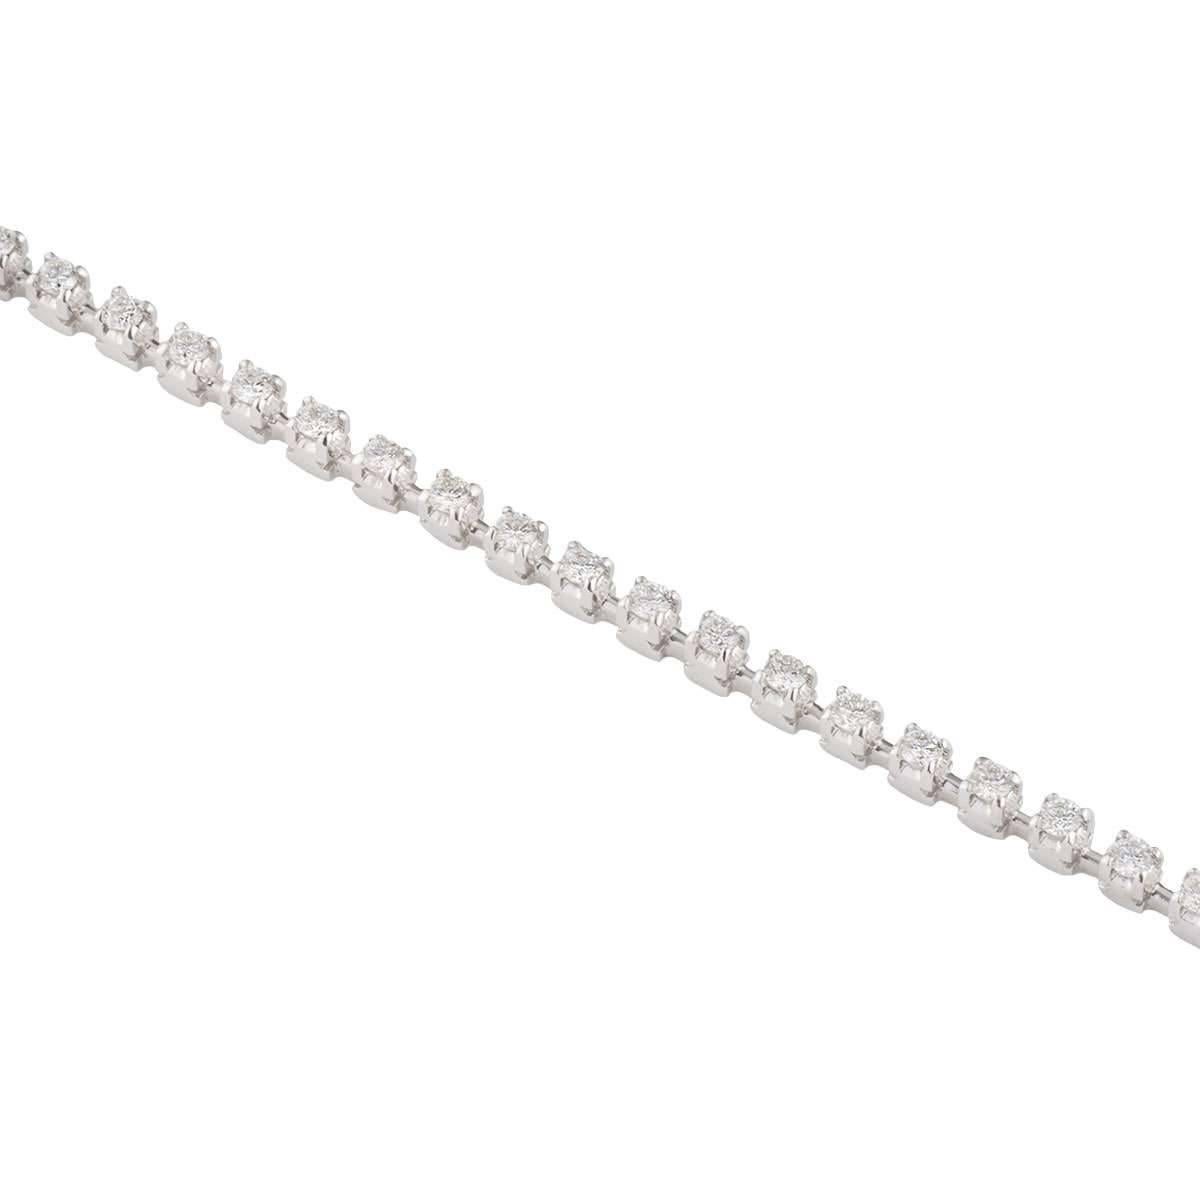 A beautiful 18k white gold diamond line bracelet. The bracelet comprises of 44 round brilliant cut diamonds each in a 4 claw setting evenly dispersed. The diamonds have a total weight of 1.58ct, G colour and VS clarity. The bracelet features a box